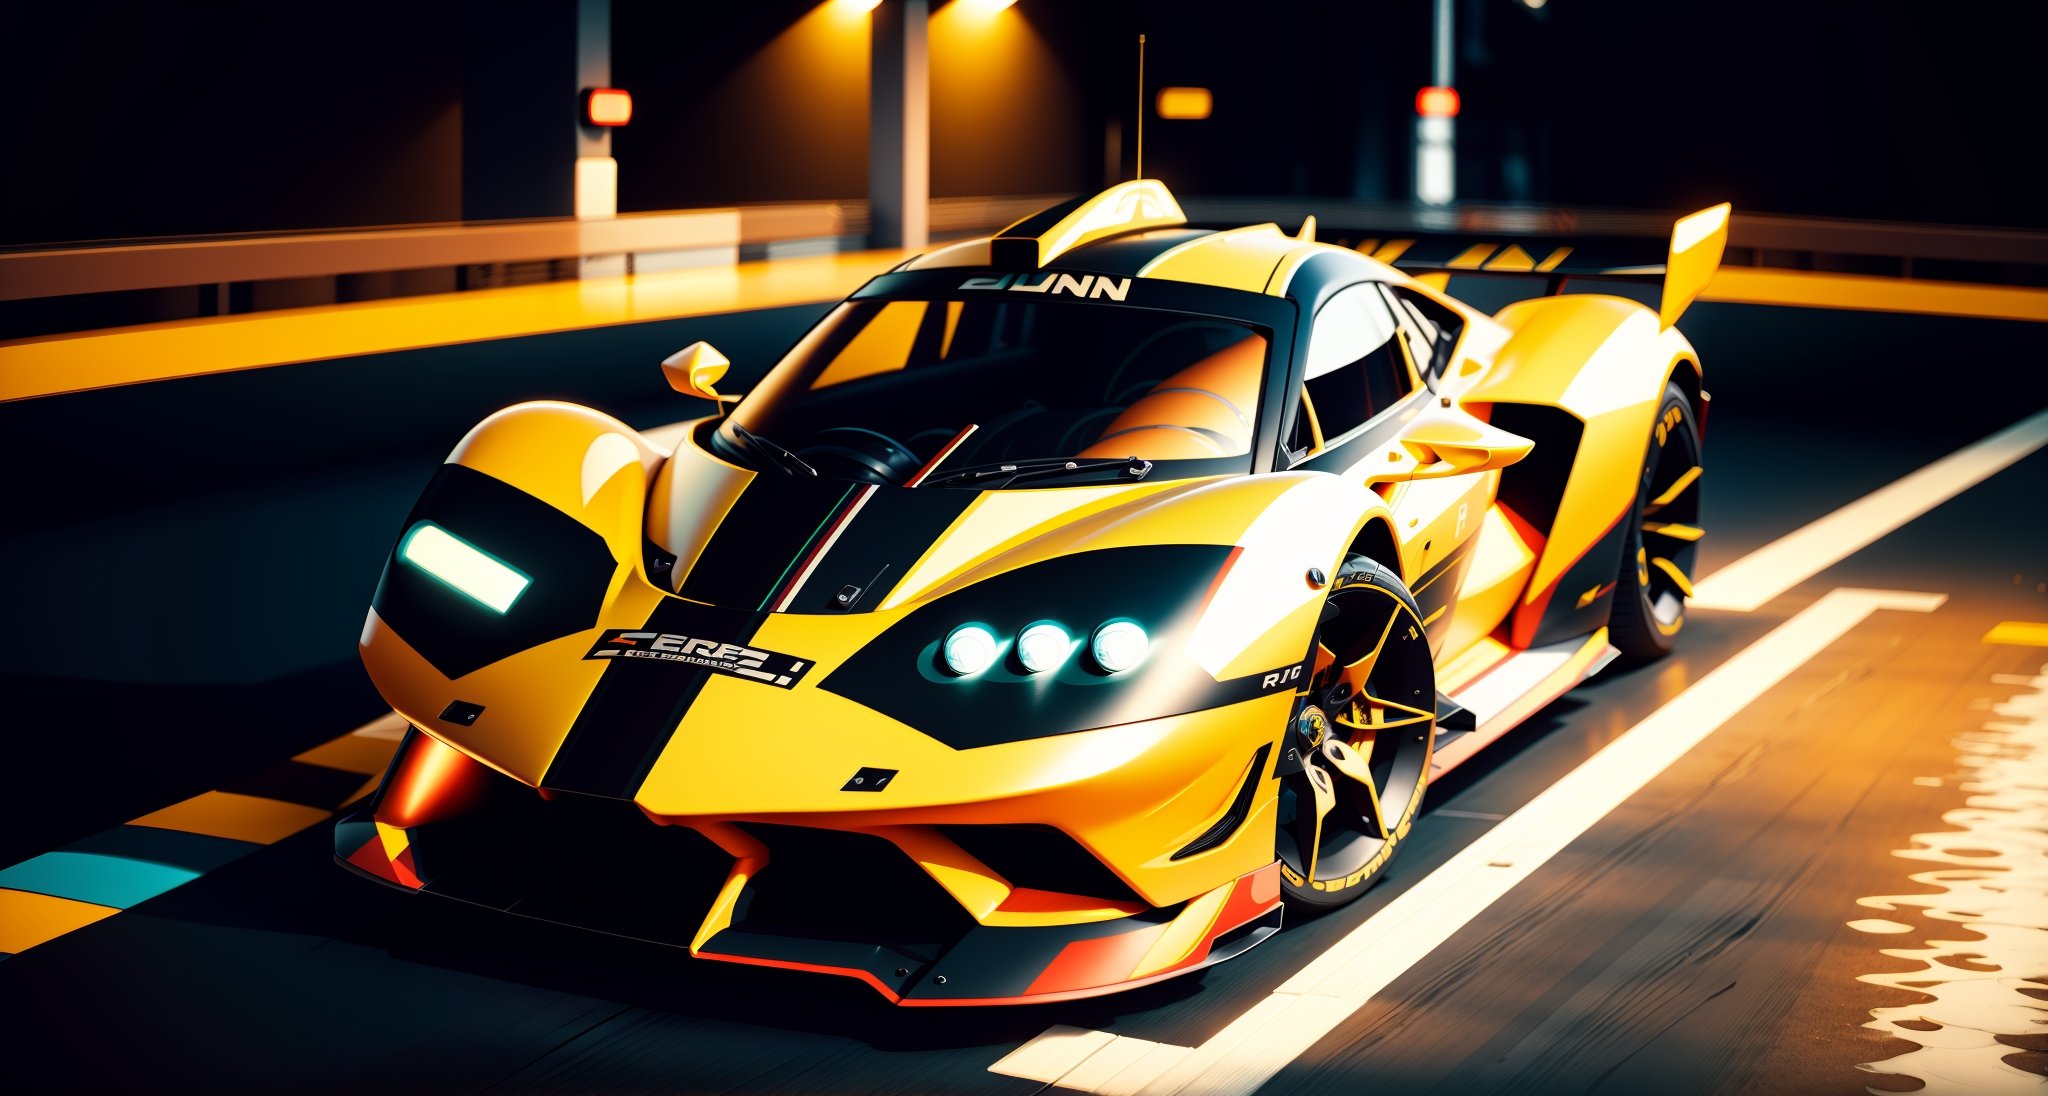 The cool sports car is a symbol of speed and power,It has a streamlined body design,Striking look and dynamic lines, 3D octane render conceptart, Houdini VFX, art nouveau ferarri car, rolands zilvinskis 3d render art, Neon le lemans hypercar,vehicle,car WEC,endurance race car,race car,race car with livery Cars race on the village circuit during the day,A mouthful of blood and speed。",dark studio, rim lighting, race stripes neon lighting, Dynamic camera angles, cinema experience, fast paced sport, drama composition, bright colors, High-resolution visuals, dramatic storytelling, wide format cinema lens, immersive atmosphere
,MagmaTech